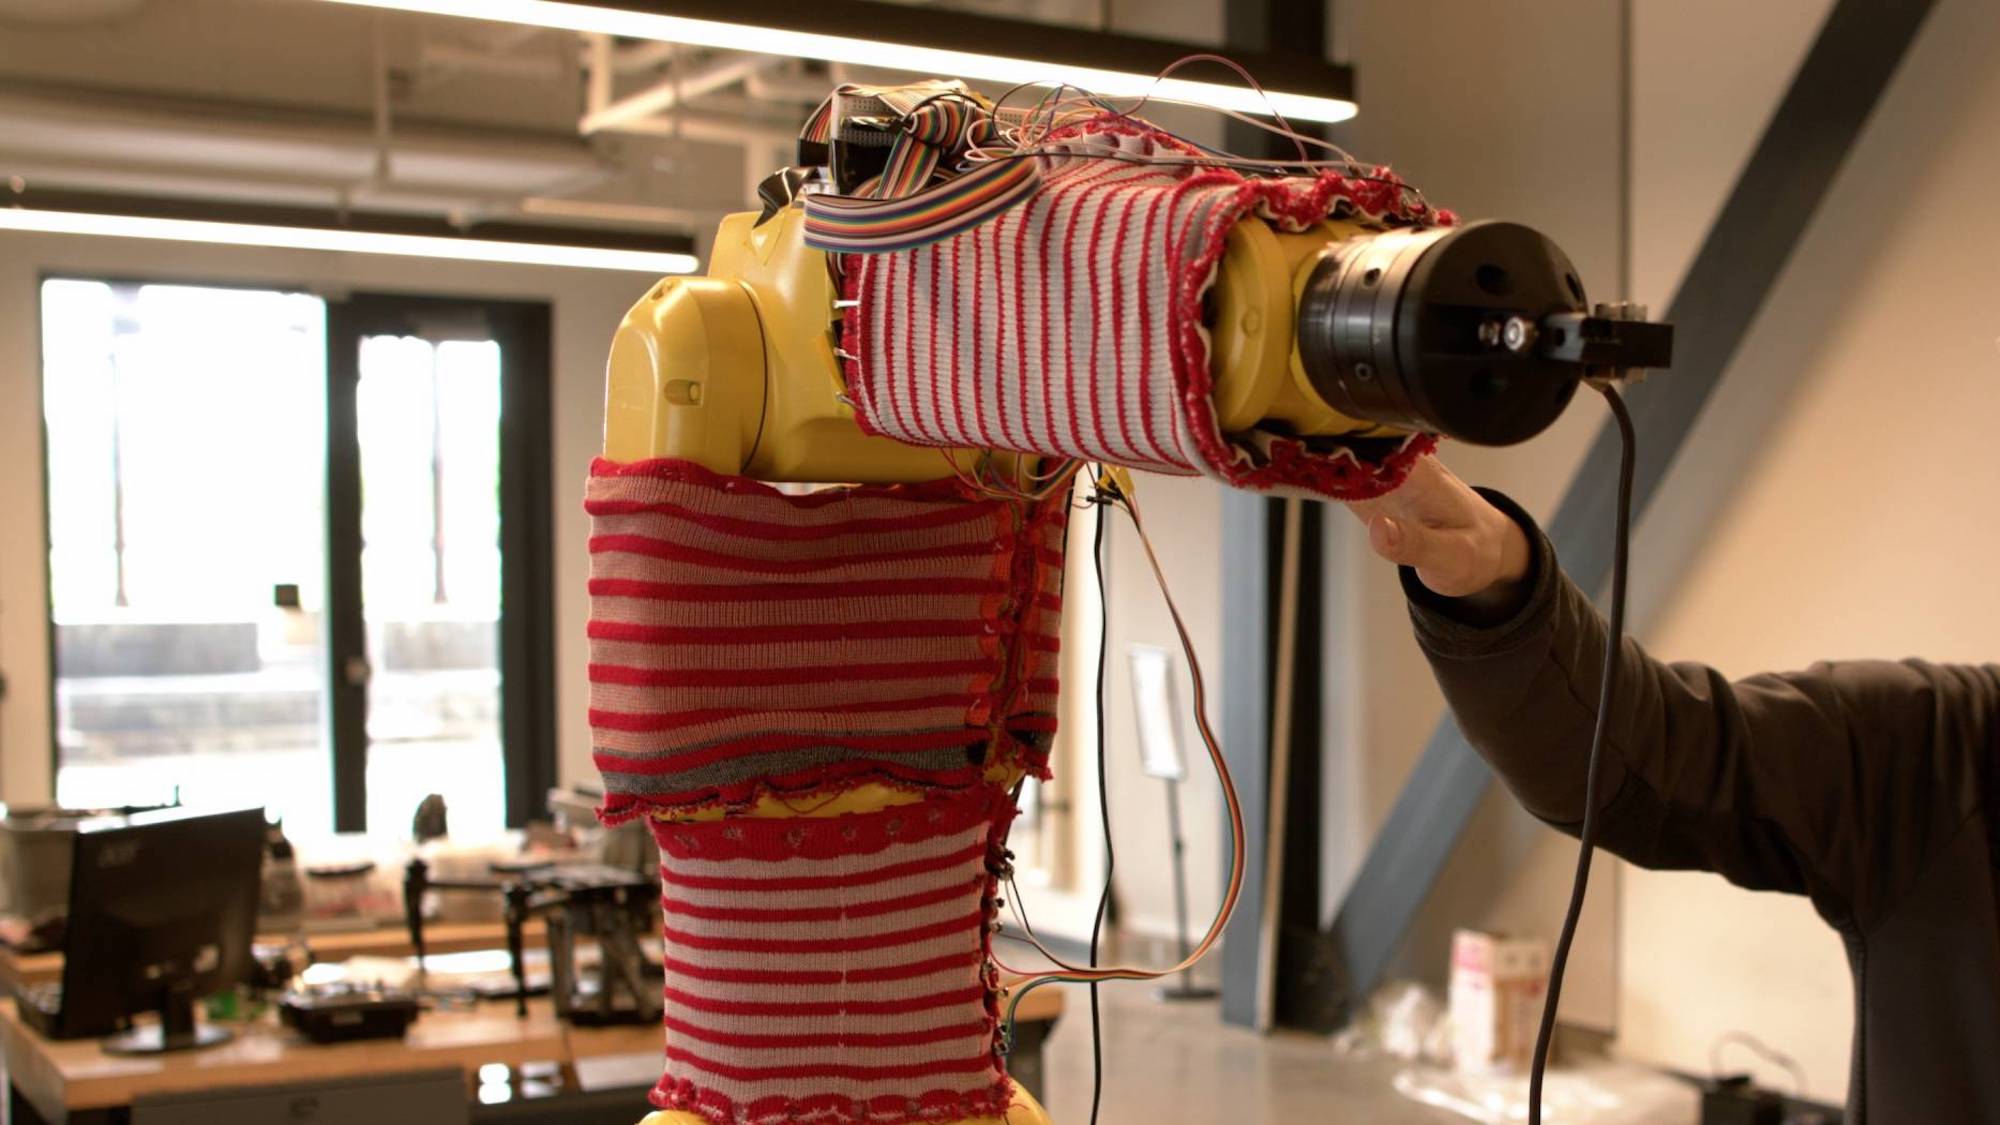 Cozy knit sweaters could help robots ‘feel’ contact